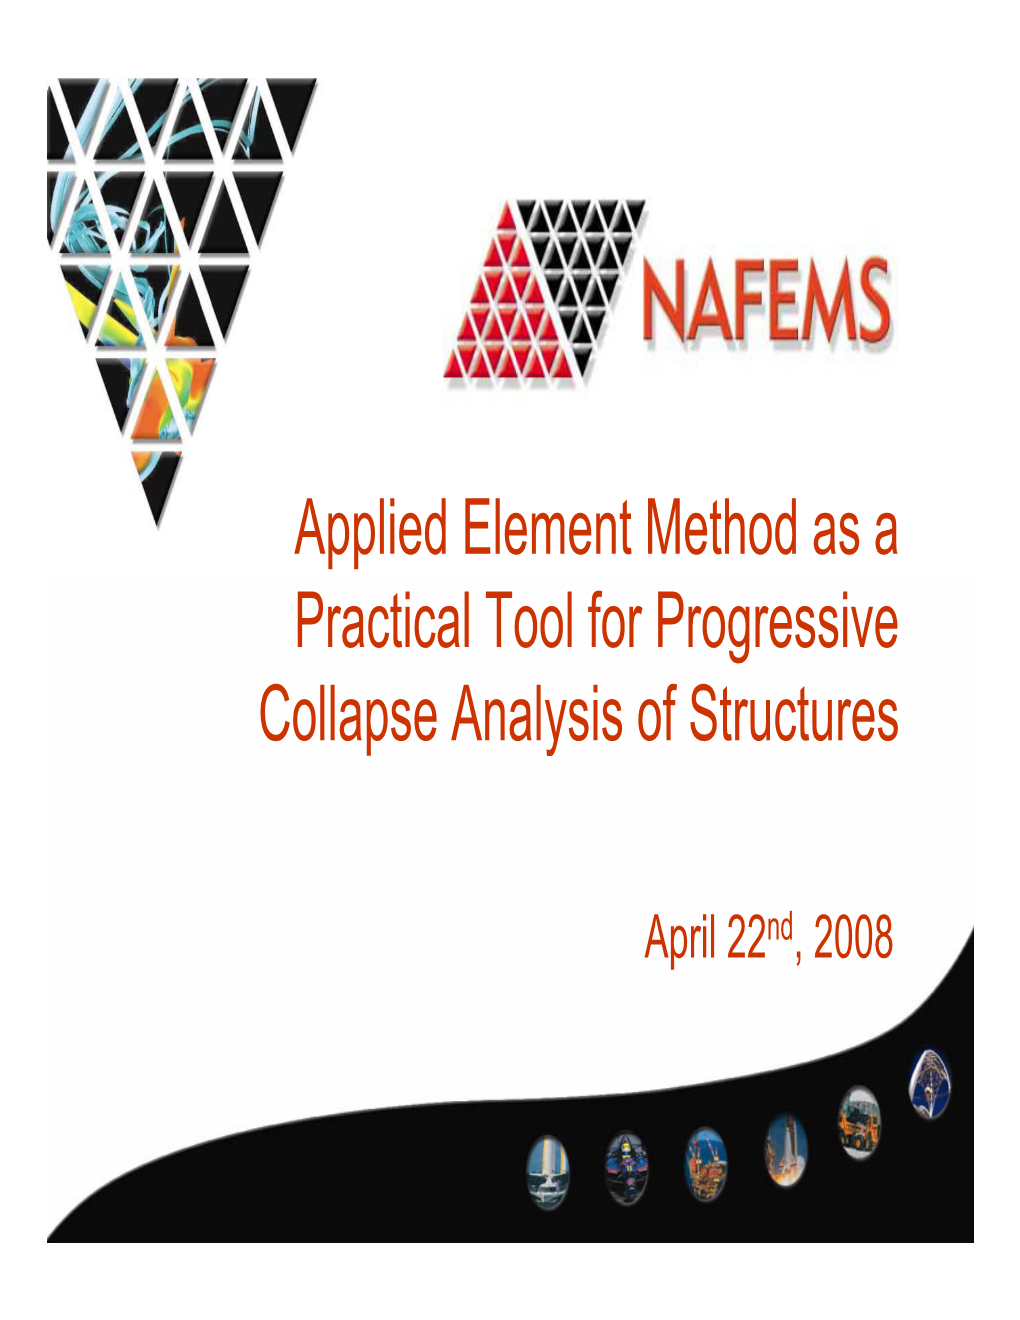 Applied Element Method As a Practical Tool for Progressive Collappyse Analysis of Structures